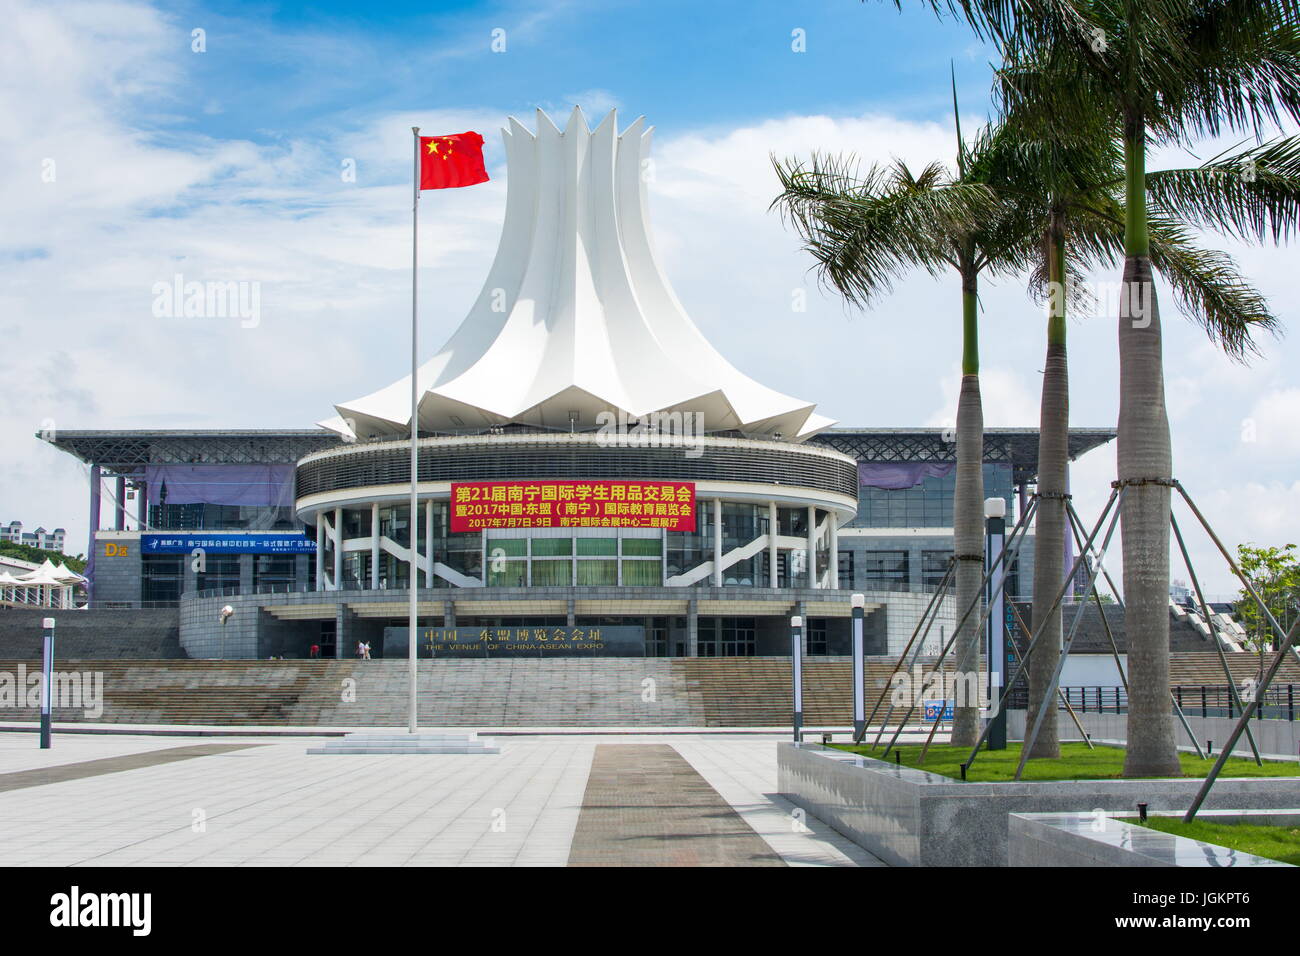 NANNING, CHINA - JUNE 9, 2017: Guangxi International Convention and Exhibition Center in Nanning, Guangxi capital. This is an important place where di Stock Photo